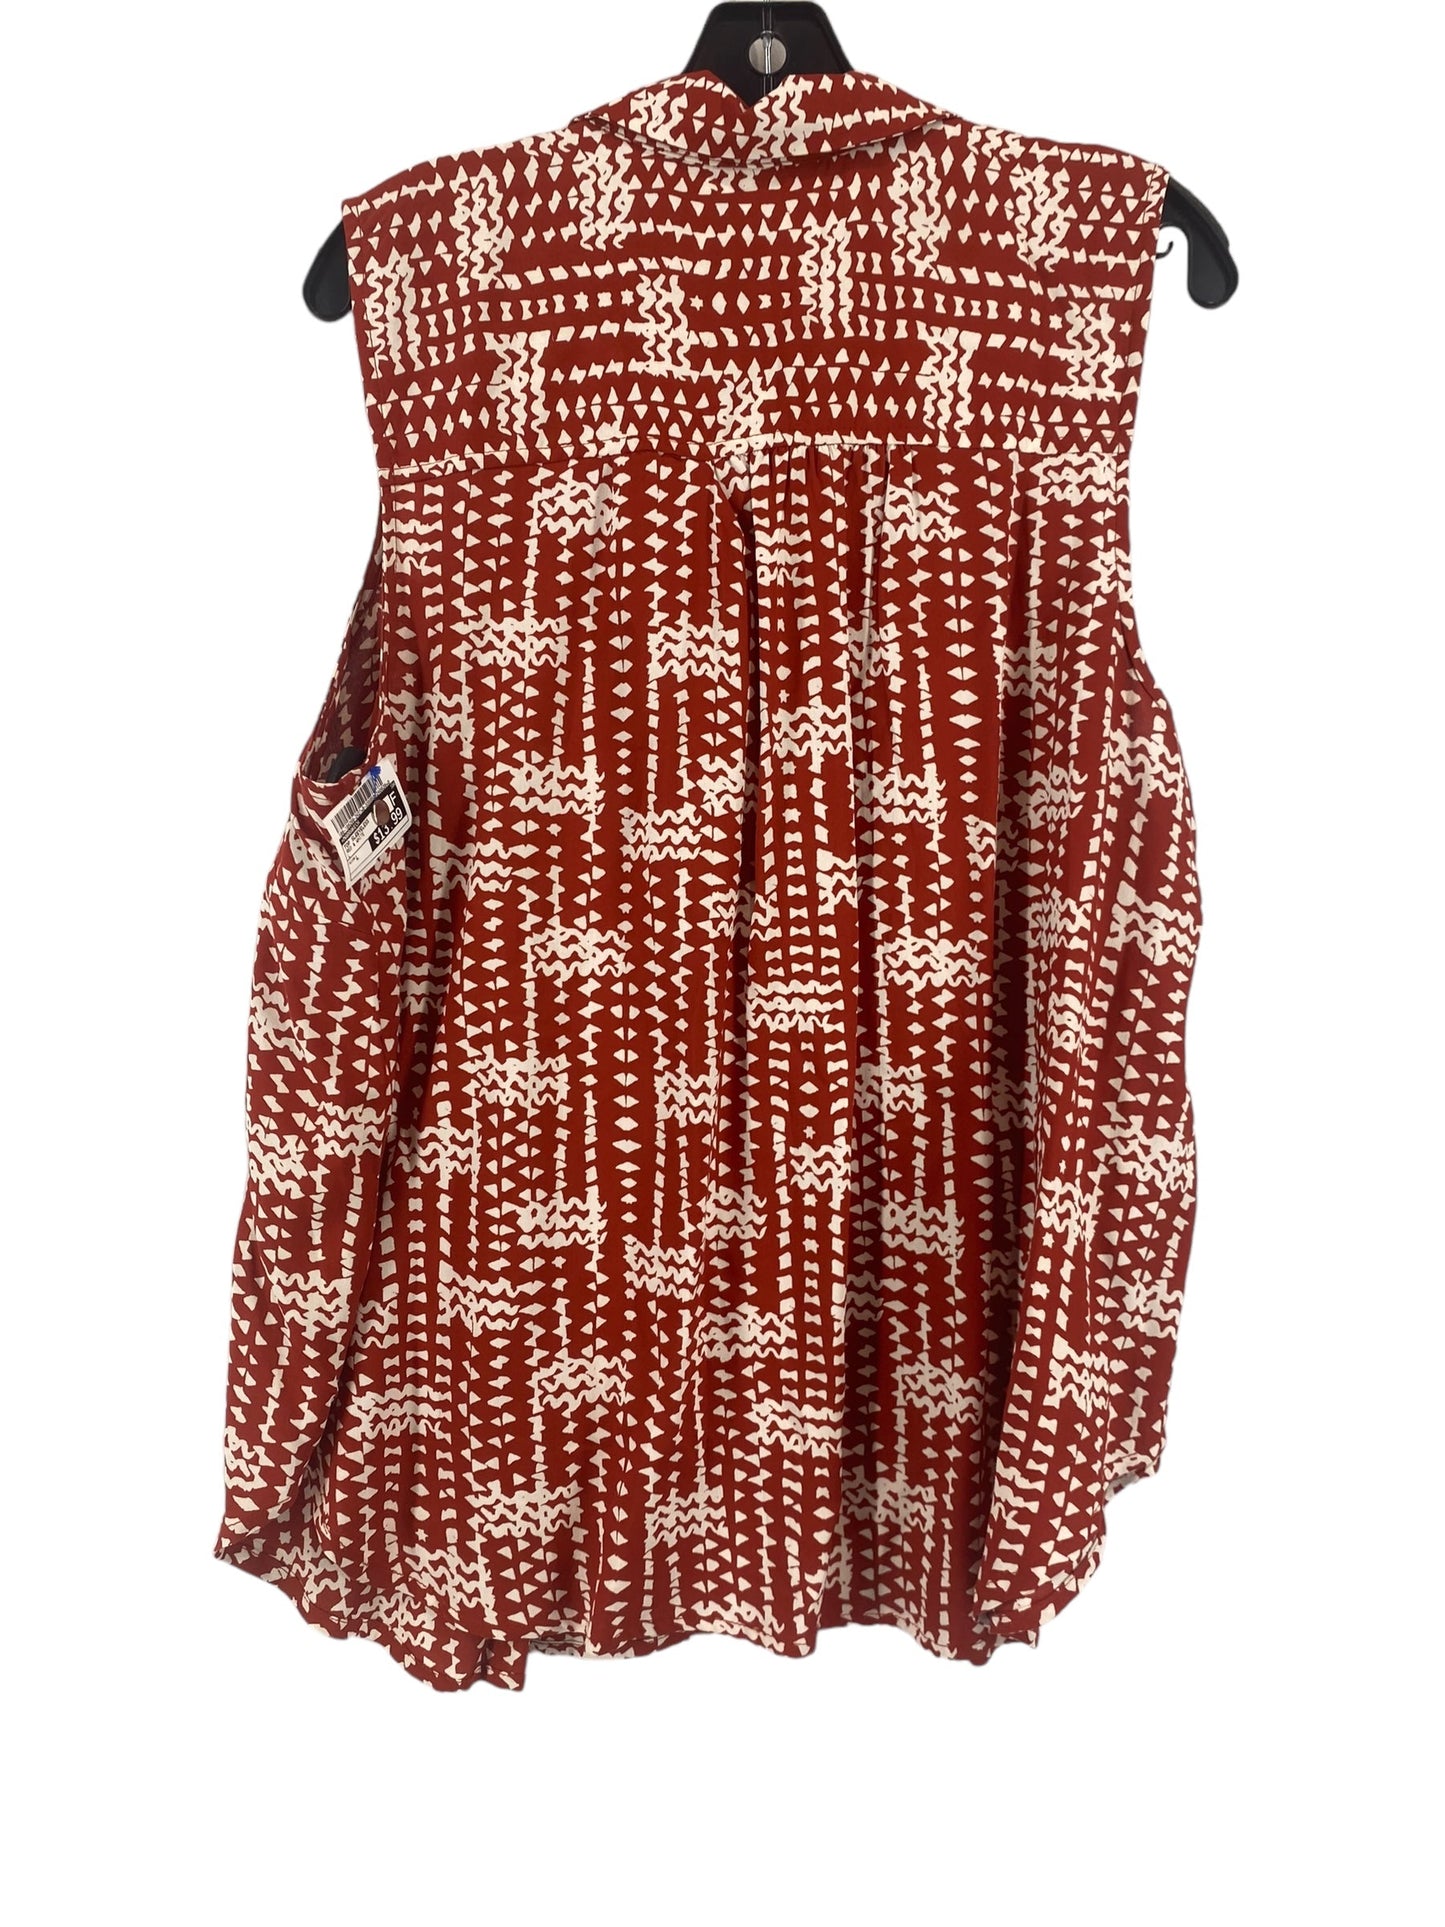 Red & White Top Sleeveless Marrakech, Size L